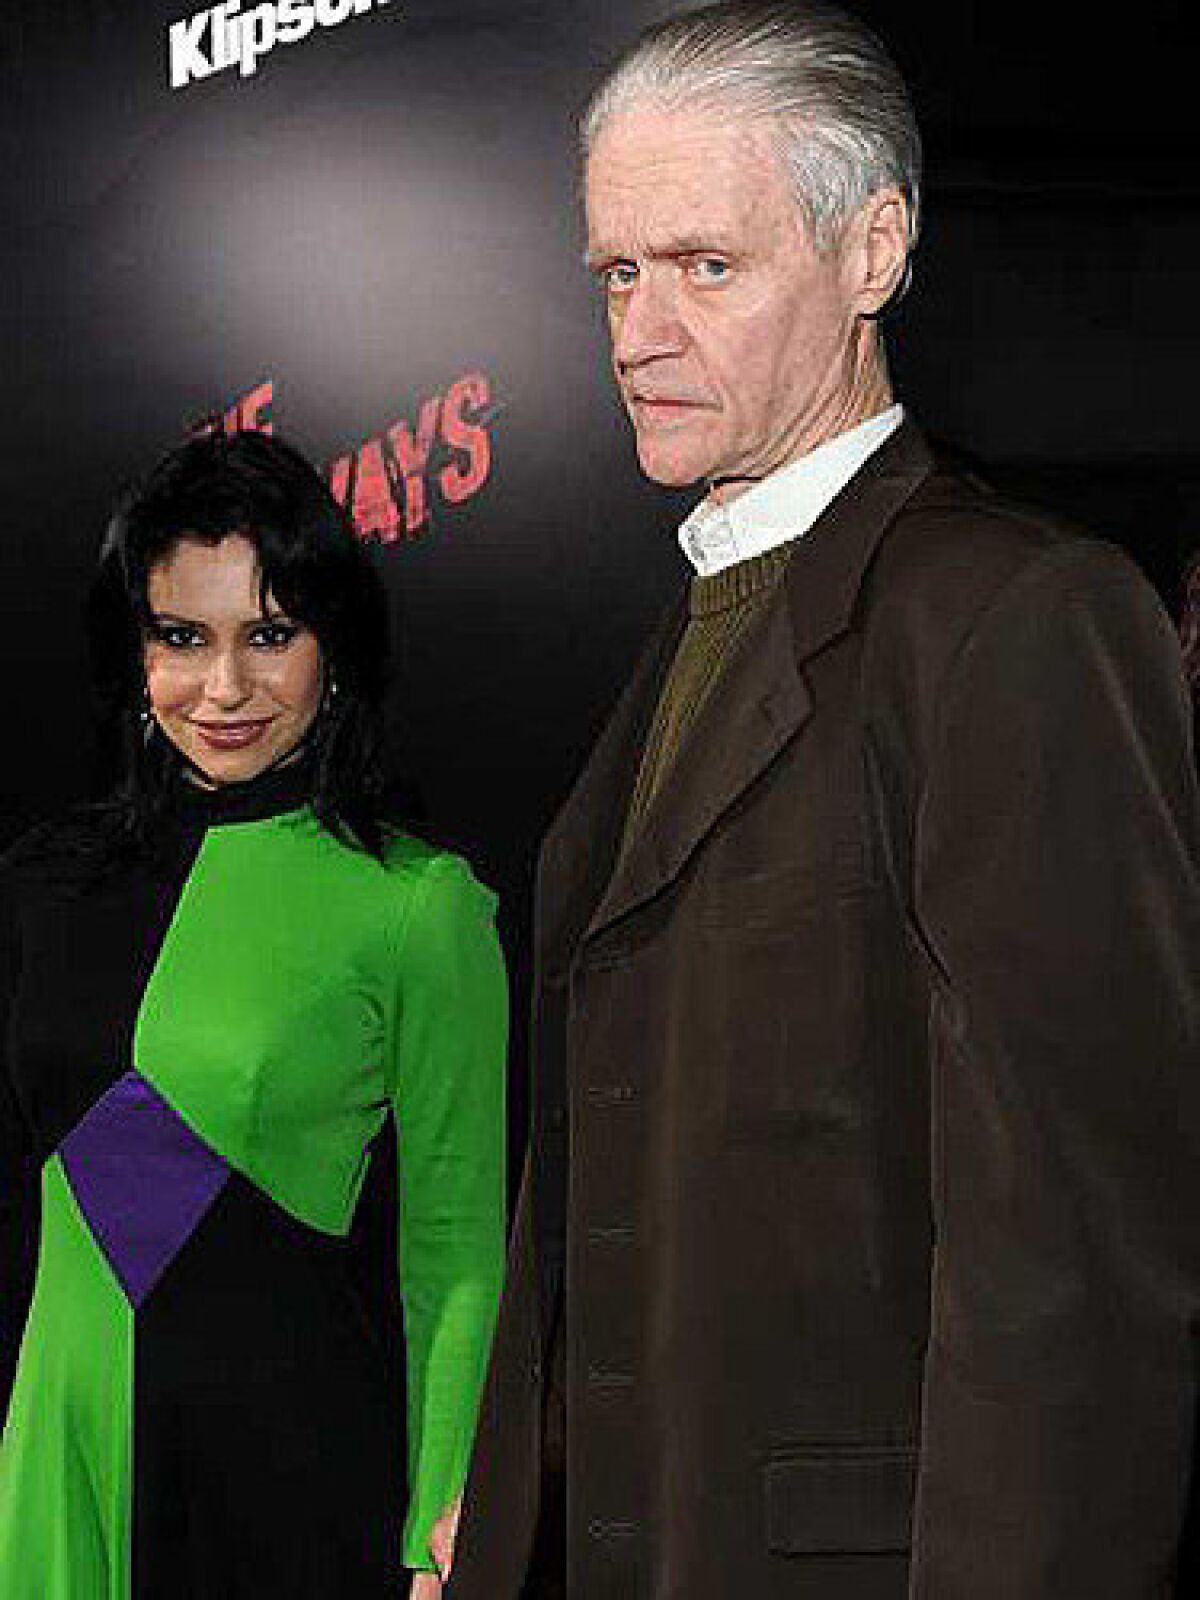 Music producer Kim Fowley, right, in 2010.